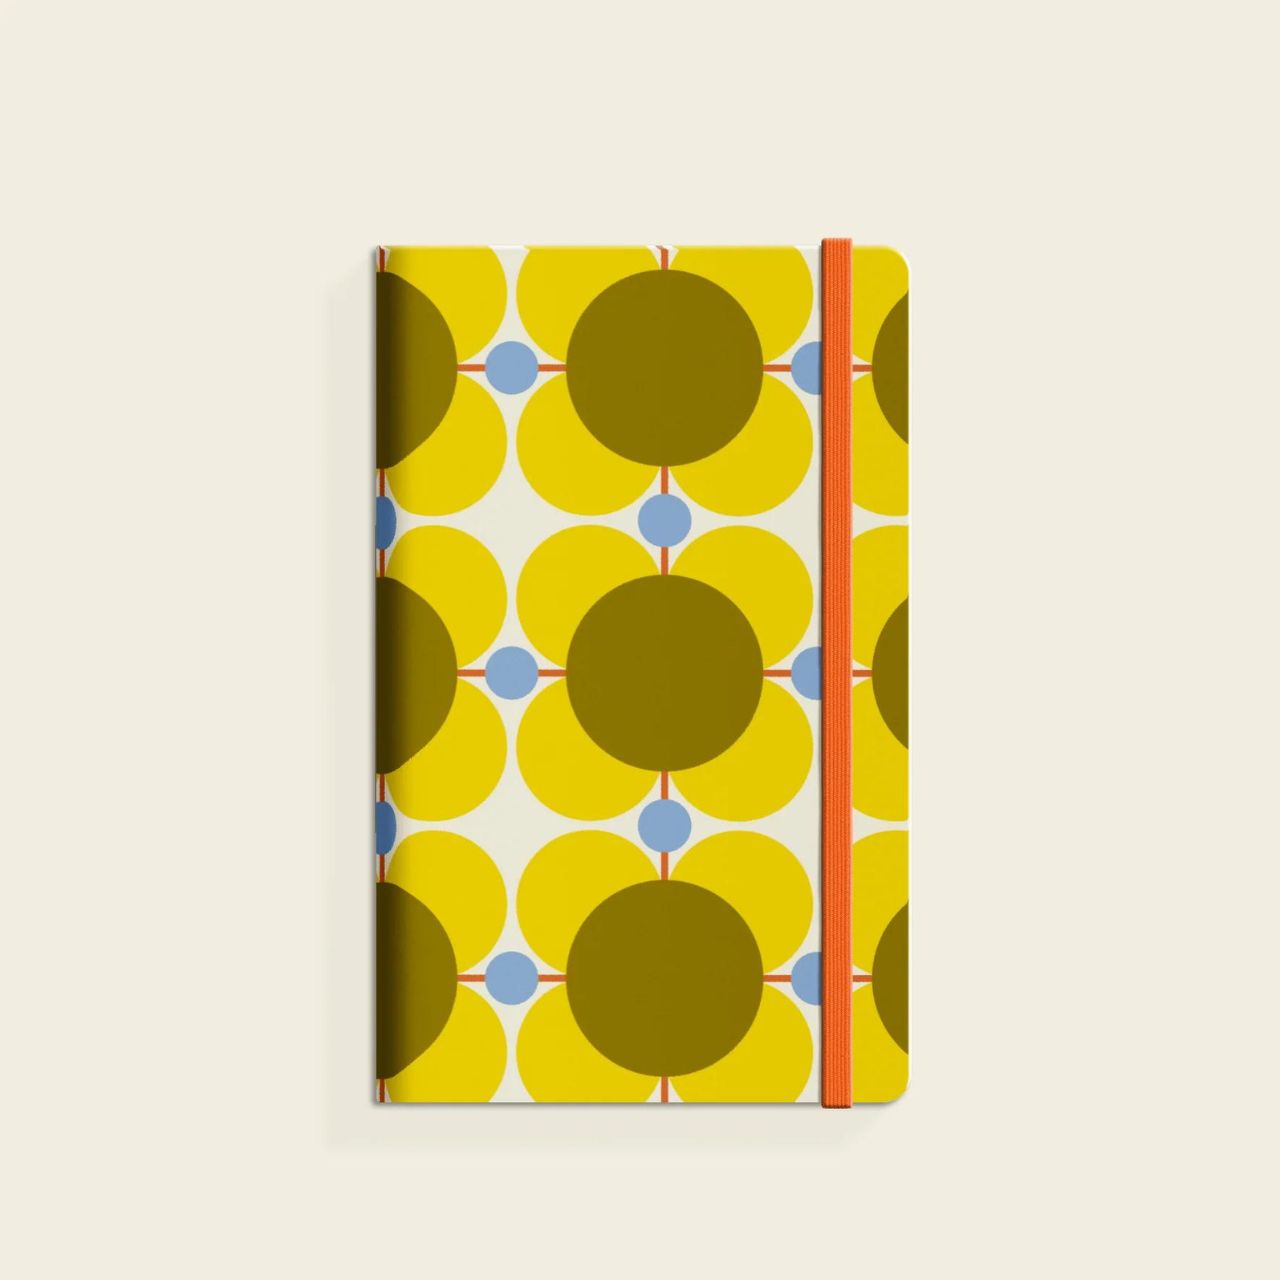 Orla Kiely Atomic Flower Dandelion Small Notebook  Write down your goals, plans and your weekly shopping list in style with our Atomic Flowers notebook. This notebook has a hardcover with rounded corners, an elastic closure and matching ribbon bookmark. Comes with a lined paper layout and expandable inner back pocket.